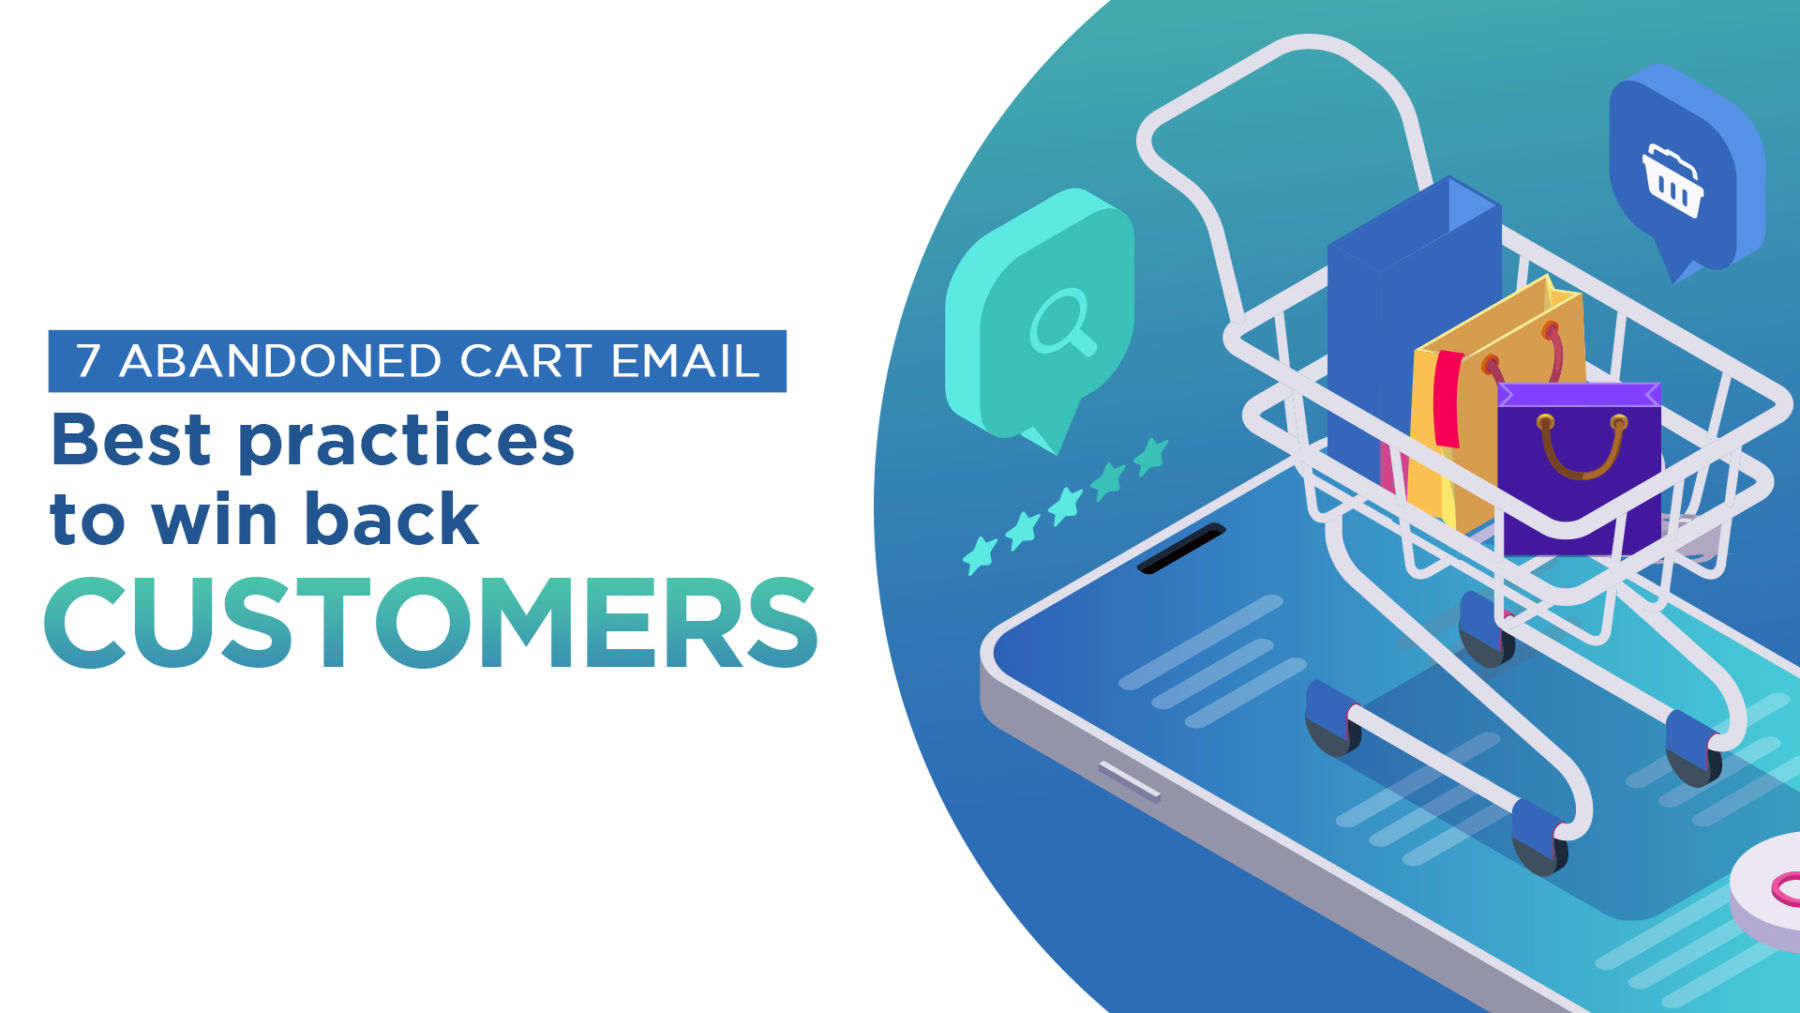 Abandoned Cart Email Best Practices